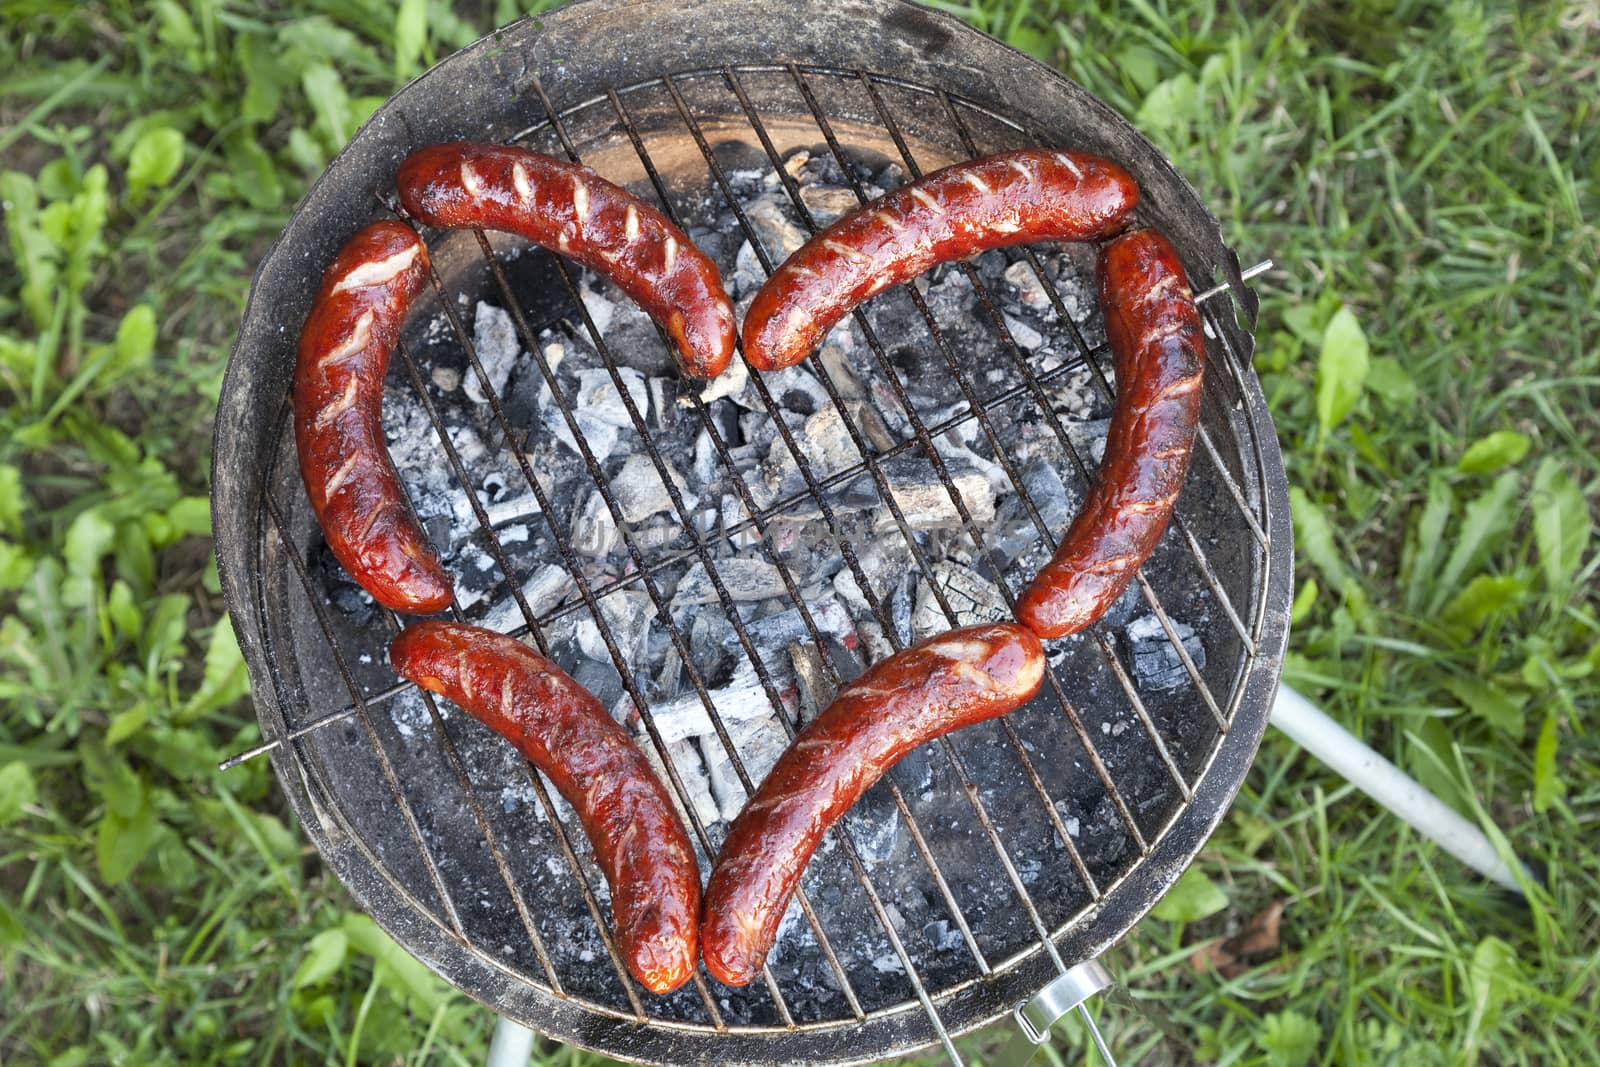 sausage on grill arranged in shape of heart 